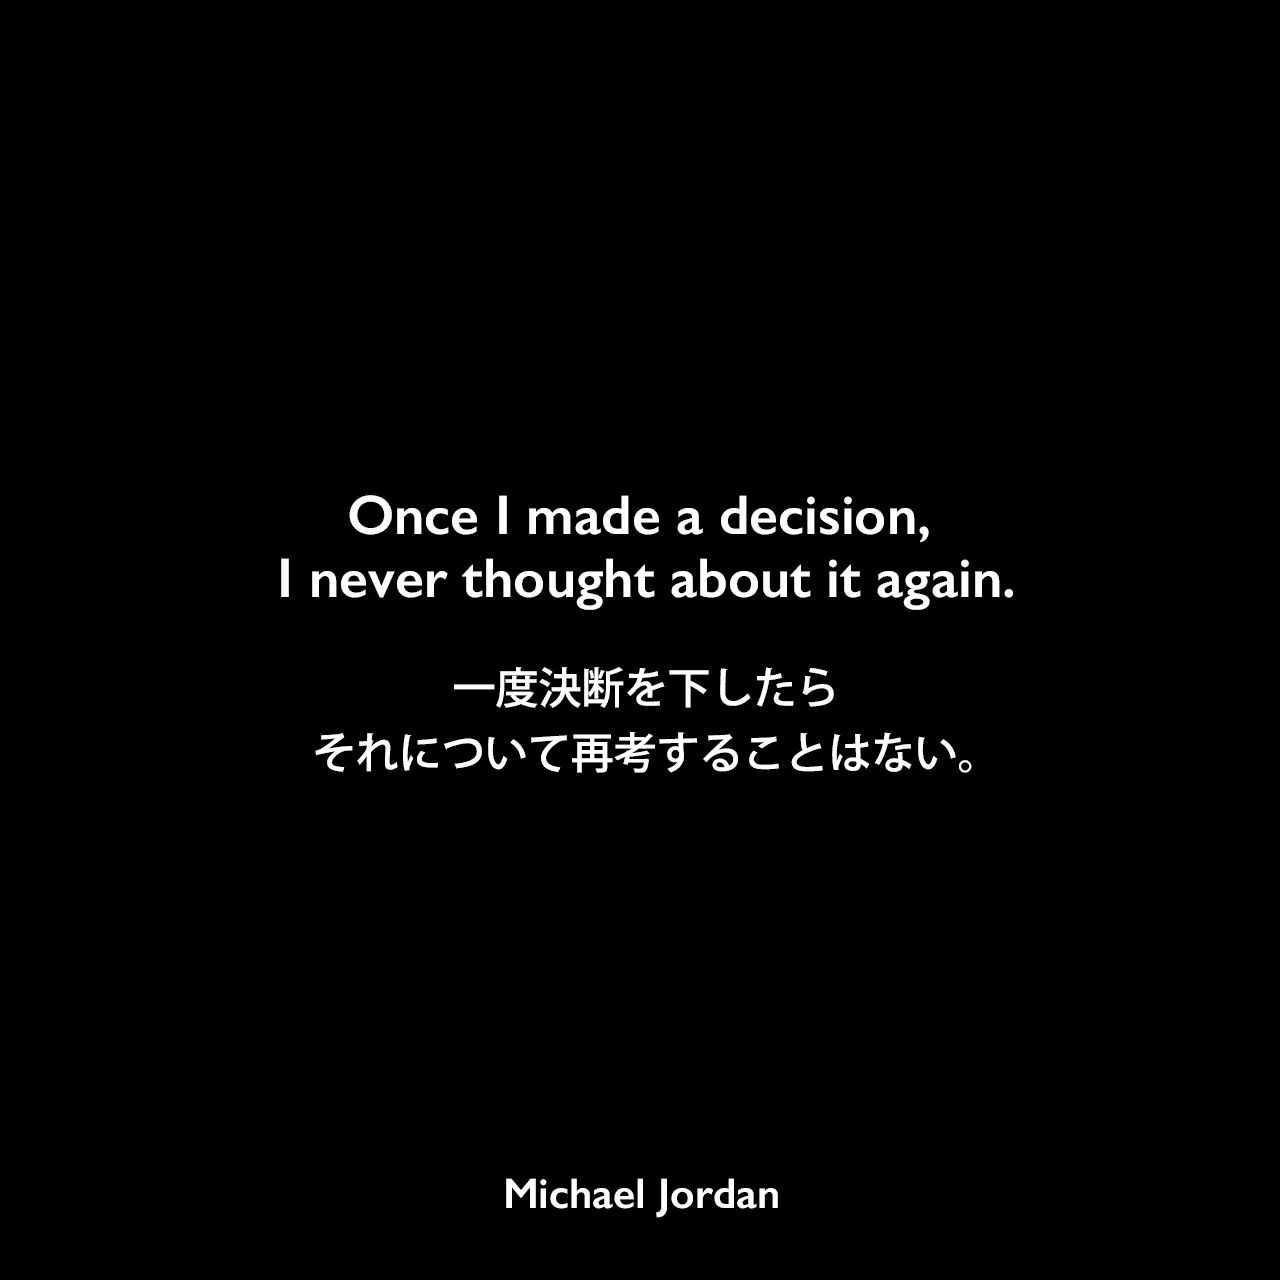 Once I made a decision, I never thought about it again.一度決断を下したら、それについて再考することはない。Michael Jordan